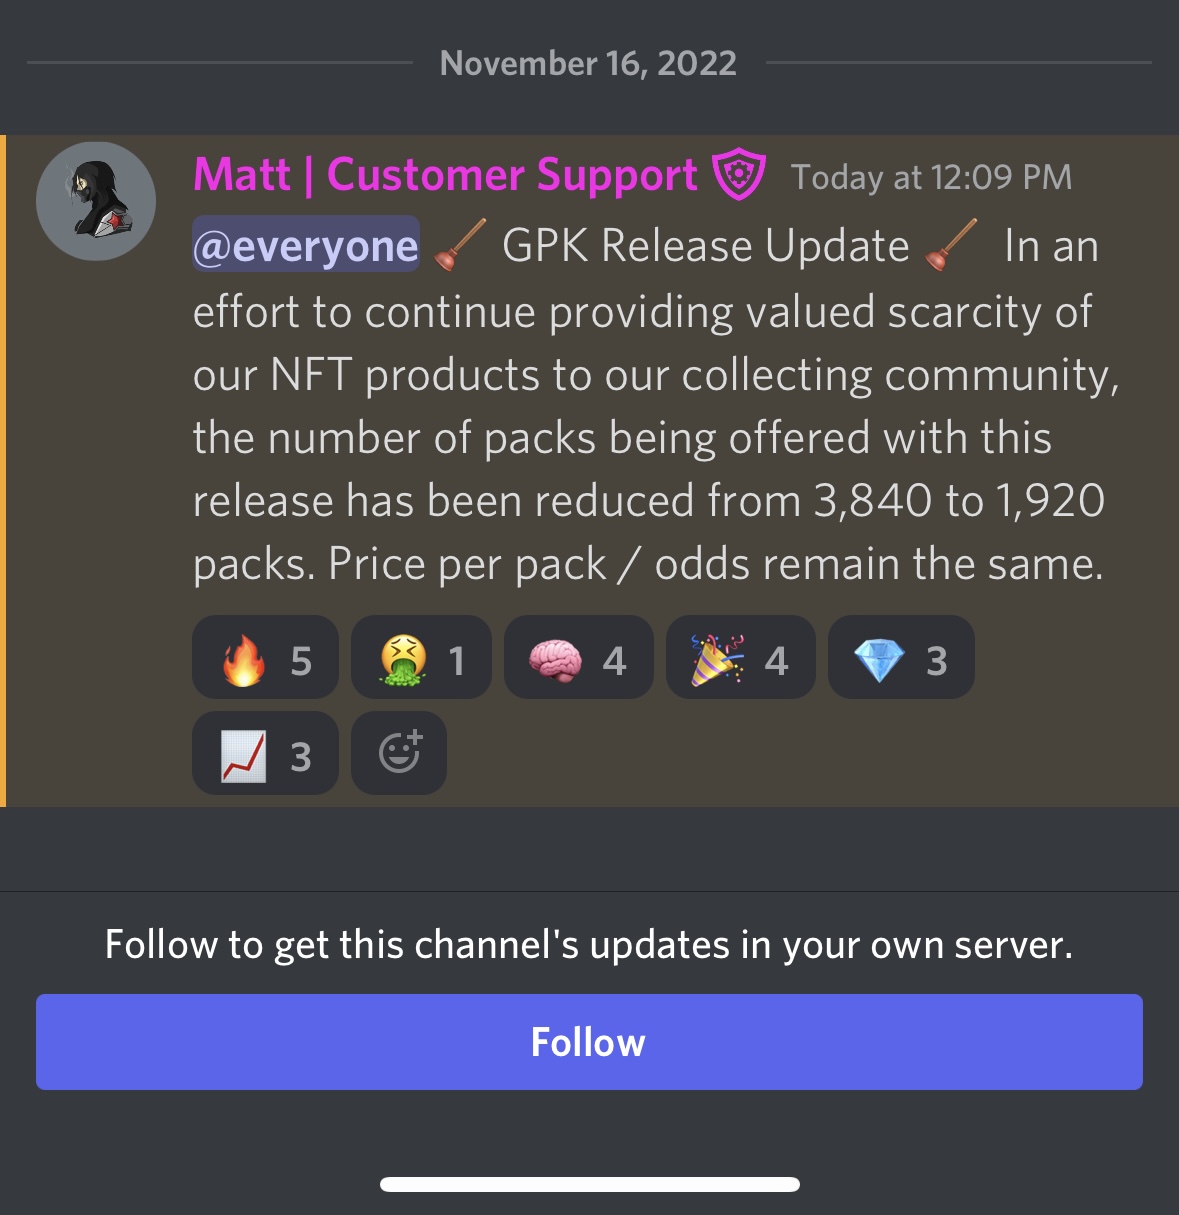 How to Find Your Discord Token (Updated 2022)